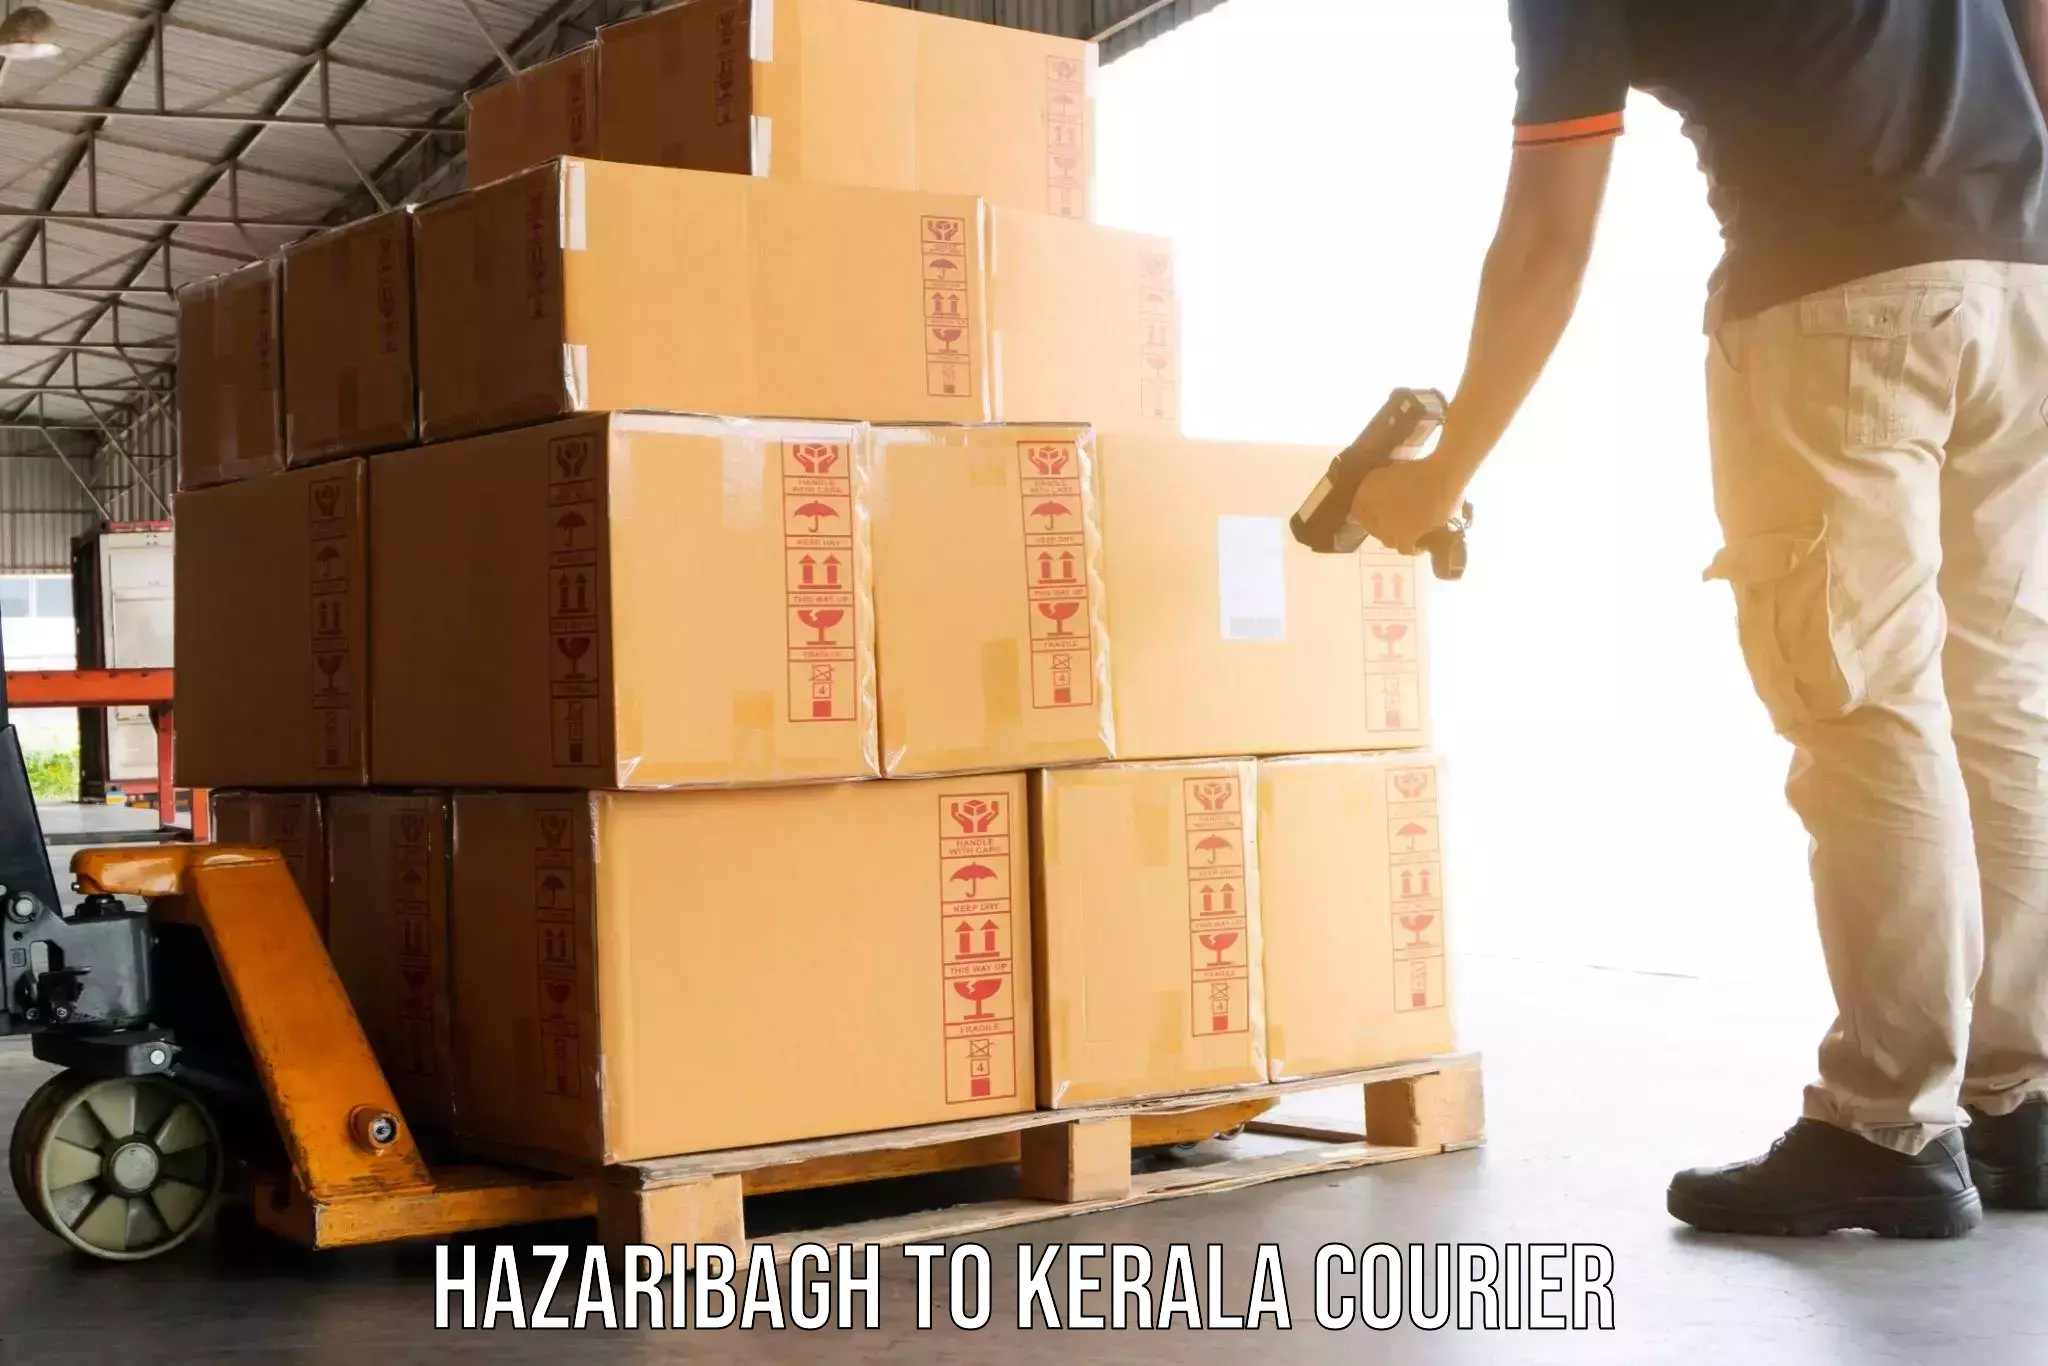 Moving and packing experts Hazaribagh to Kerala